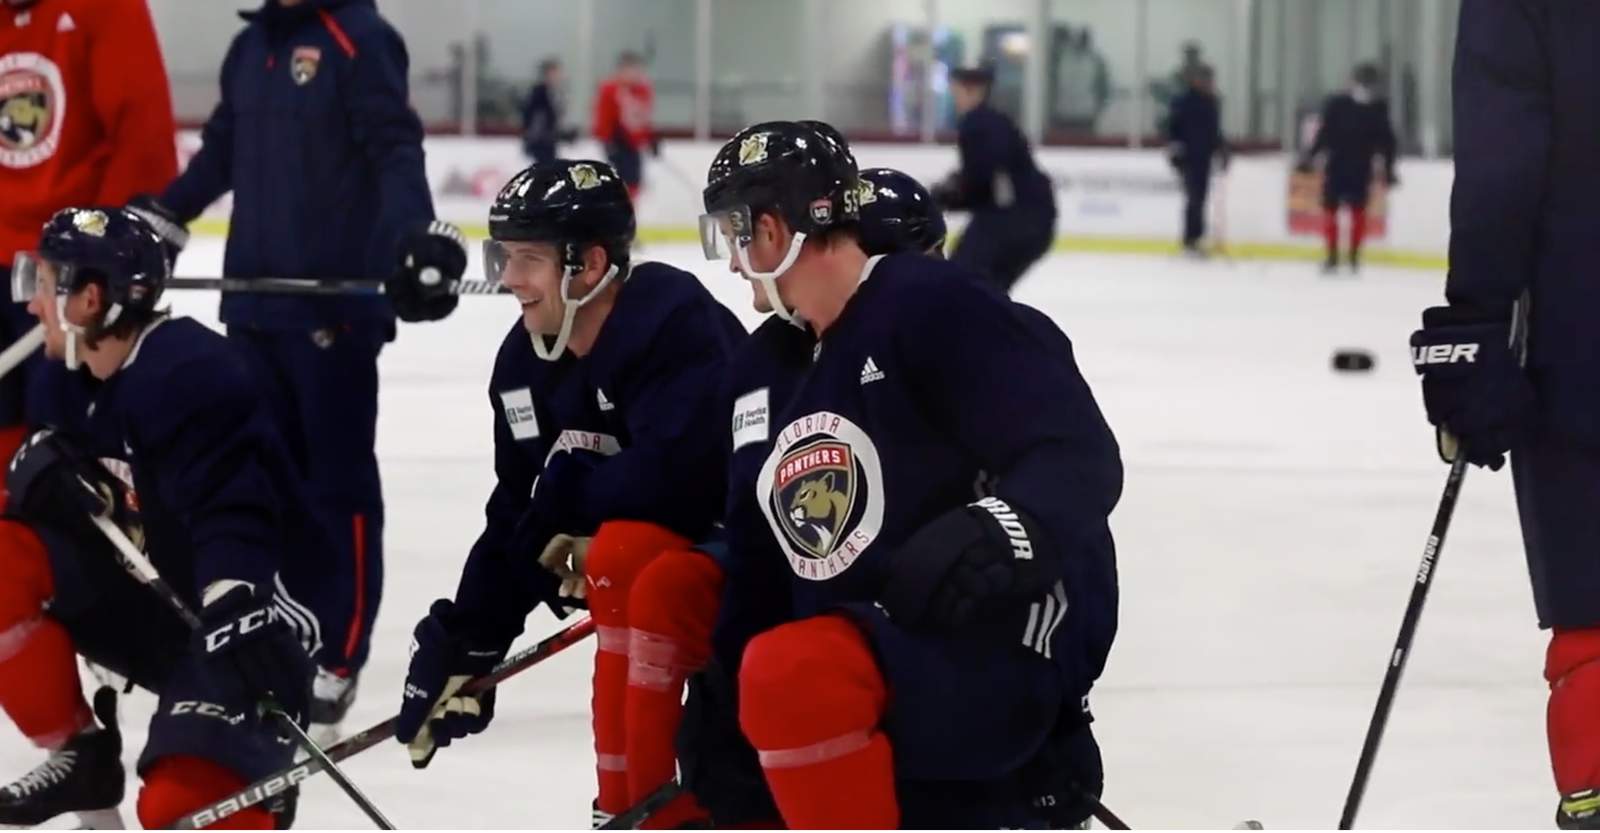 In their own words: 10 training camp topics told through voice of Florida Panthers players